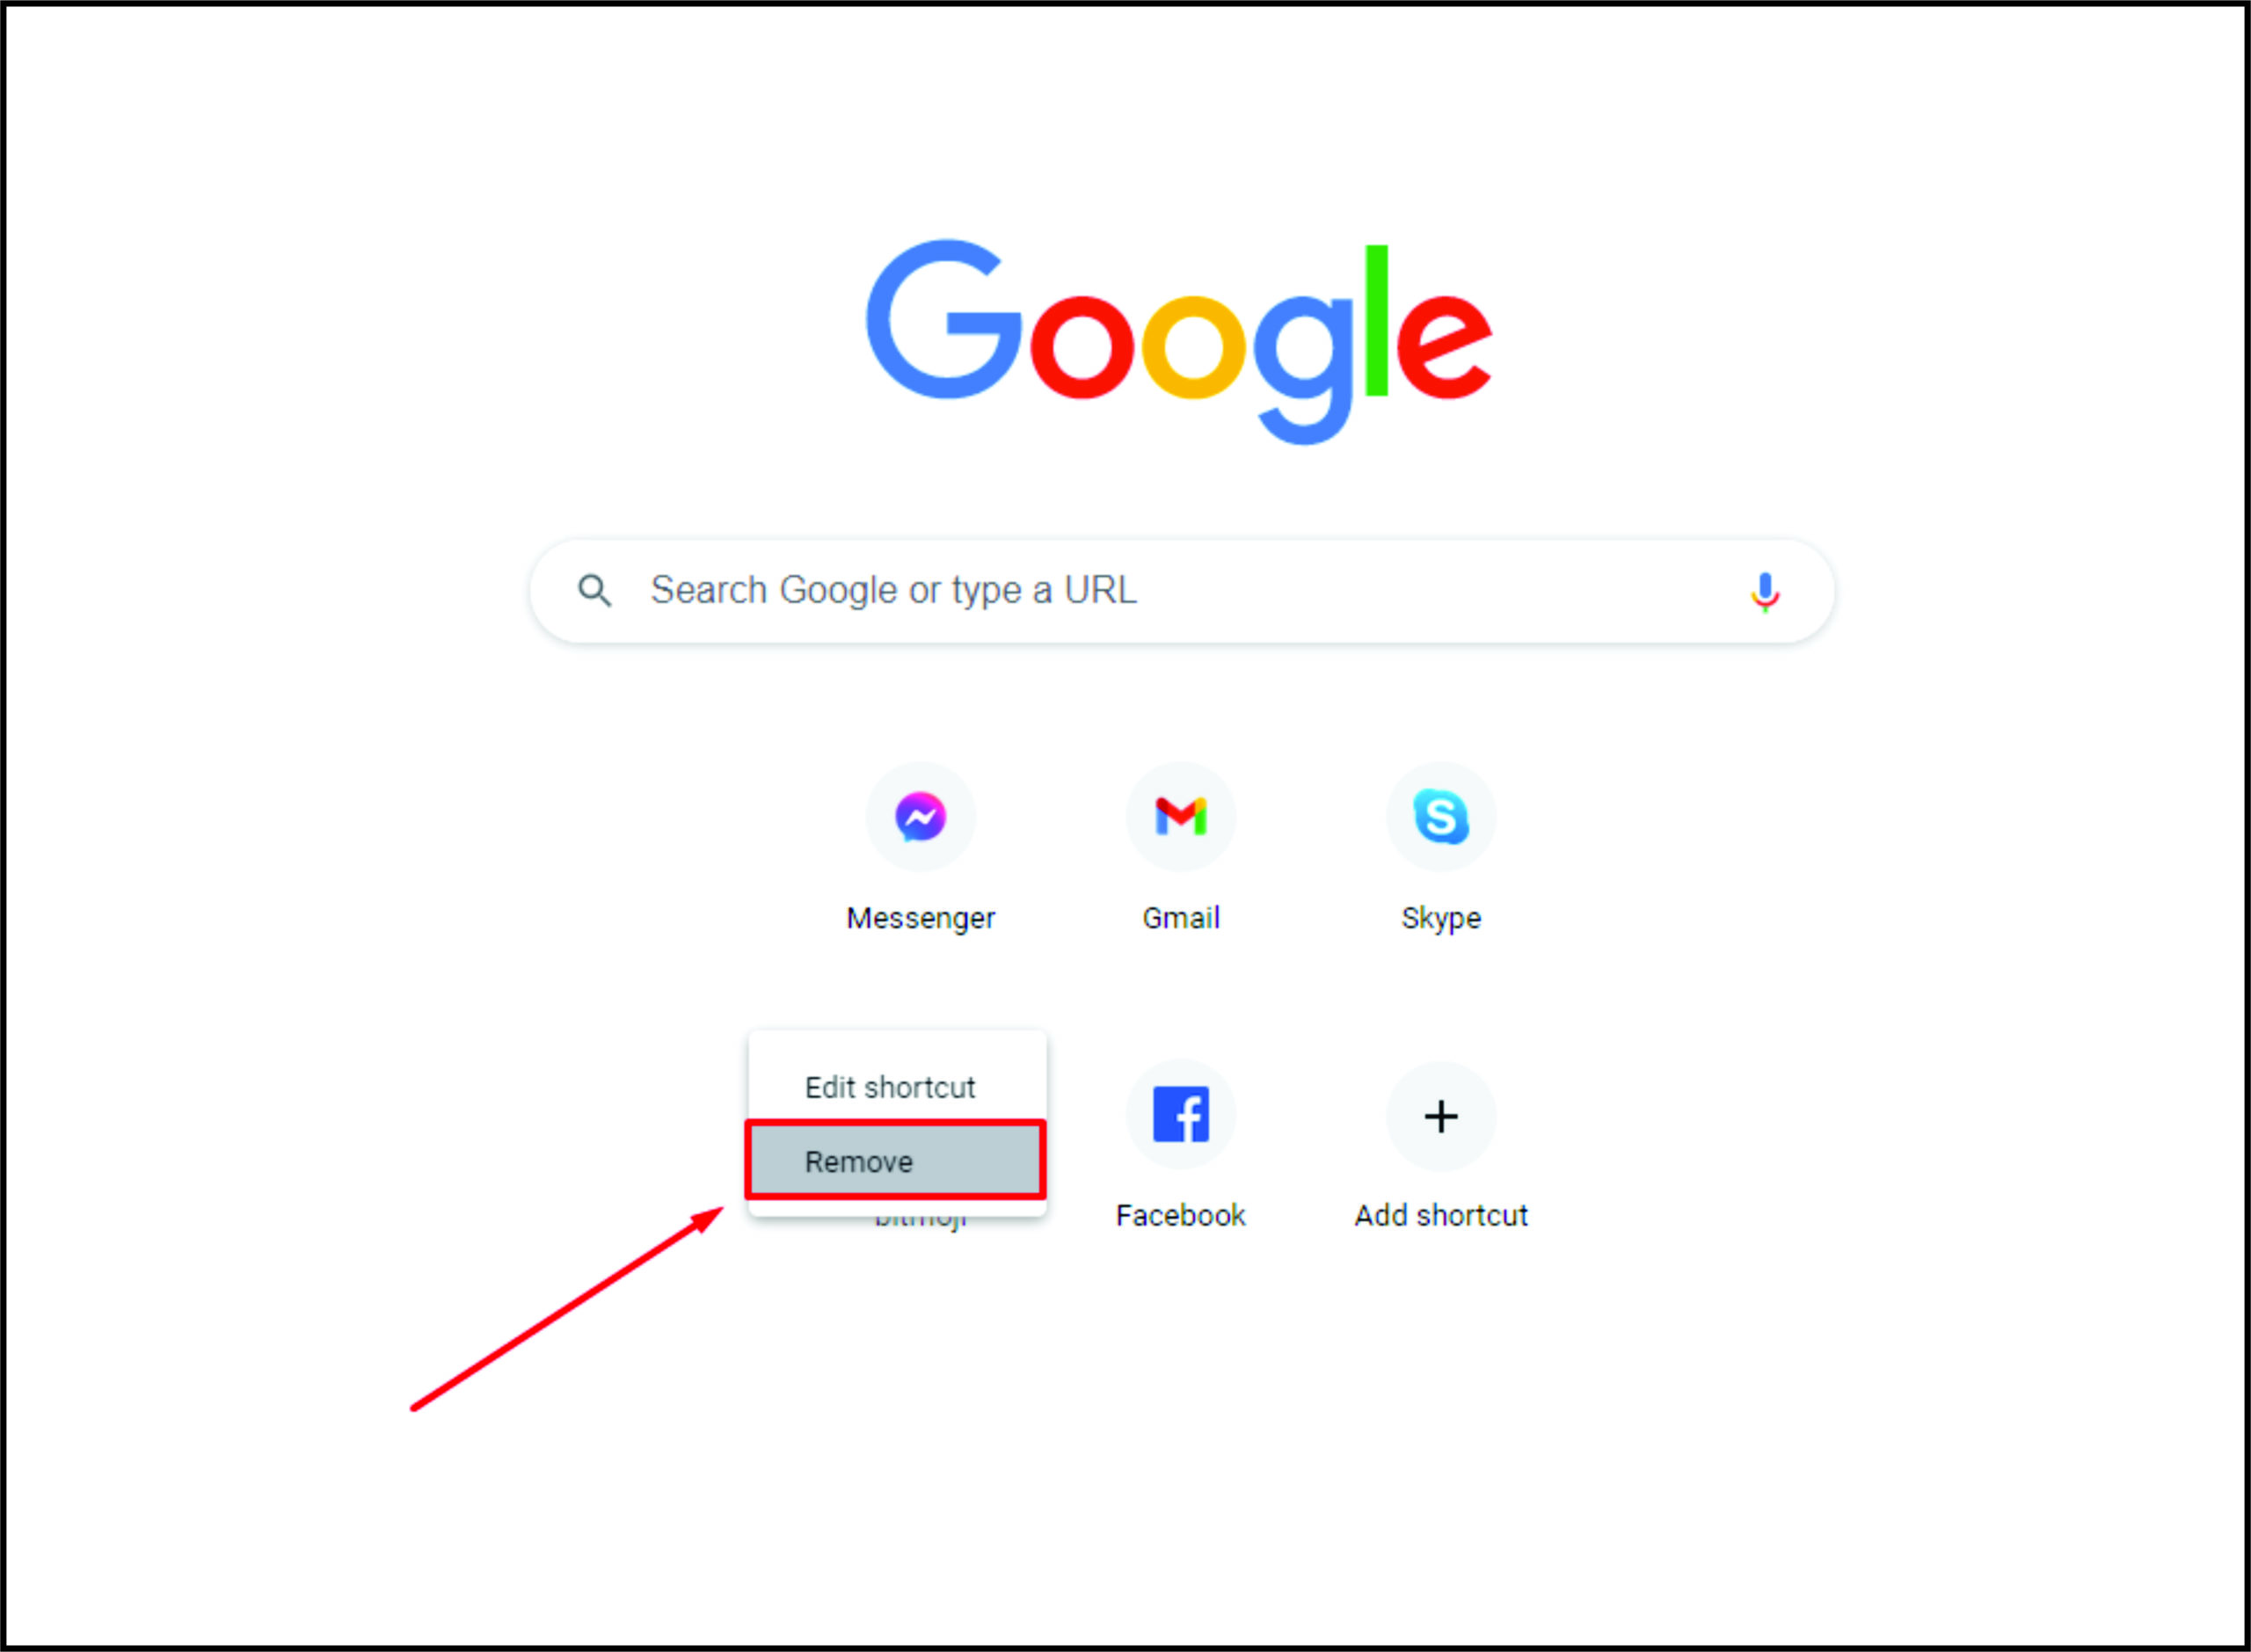 Click on the three dots on the top right corner of the browser and select More Tools > Extensions.
Disable all extensions and check if the video processes correctly.